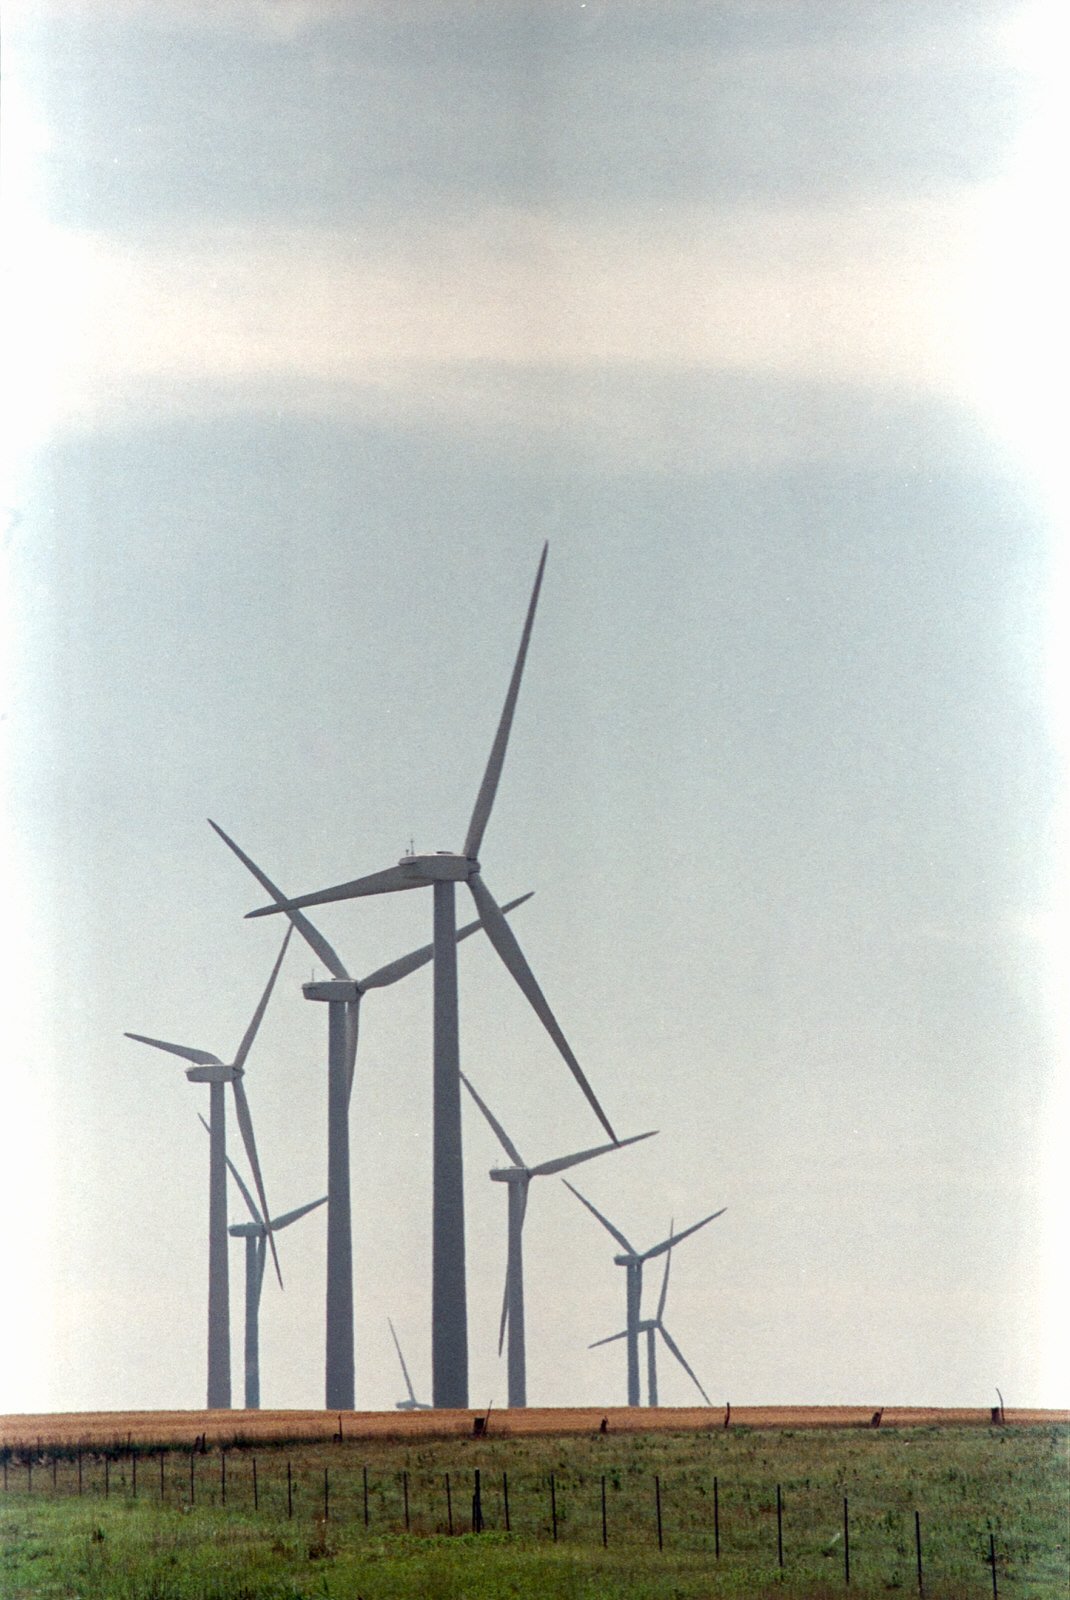 The wind turbines...I was definitely obsessed with getting what I felt was a cool shot of them. 